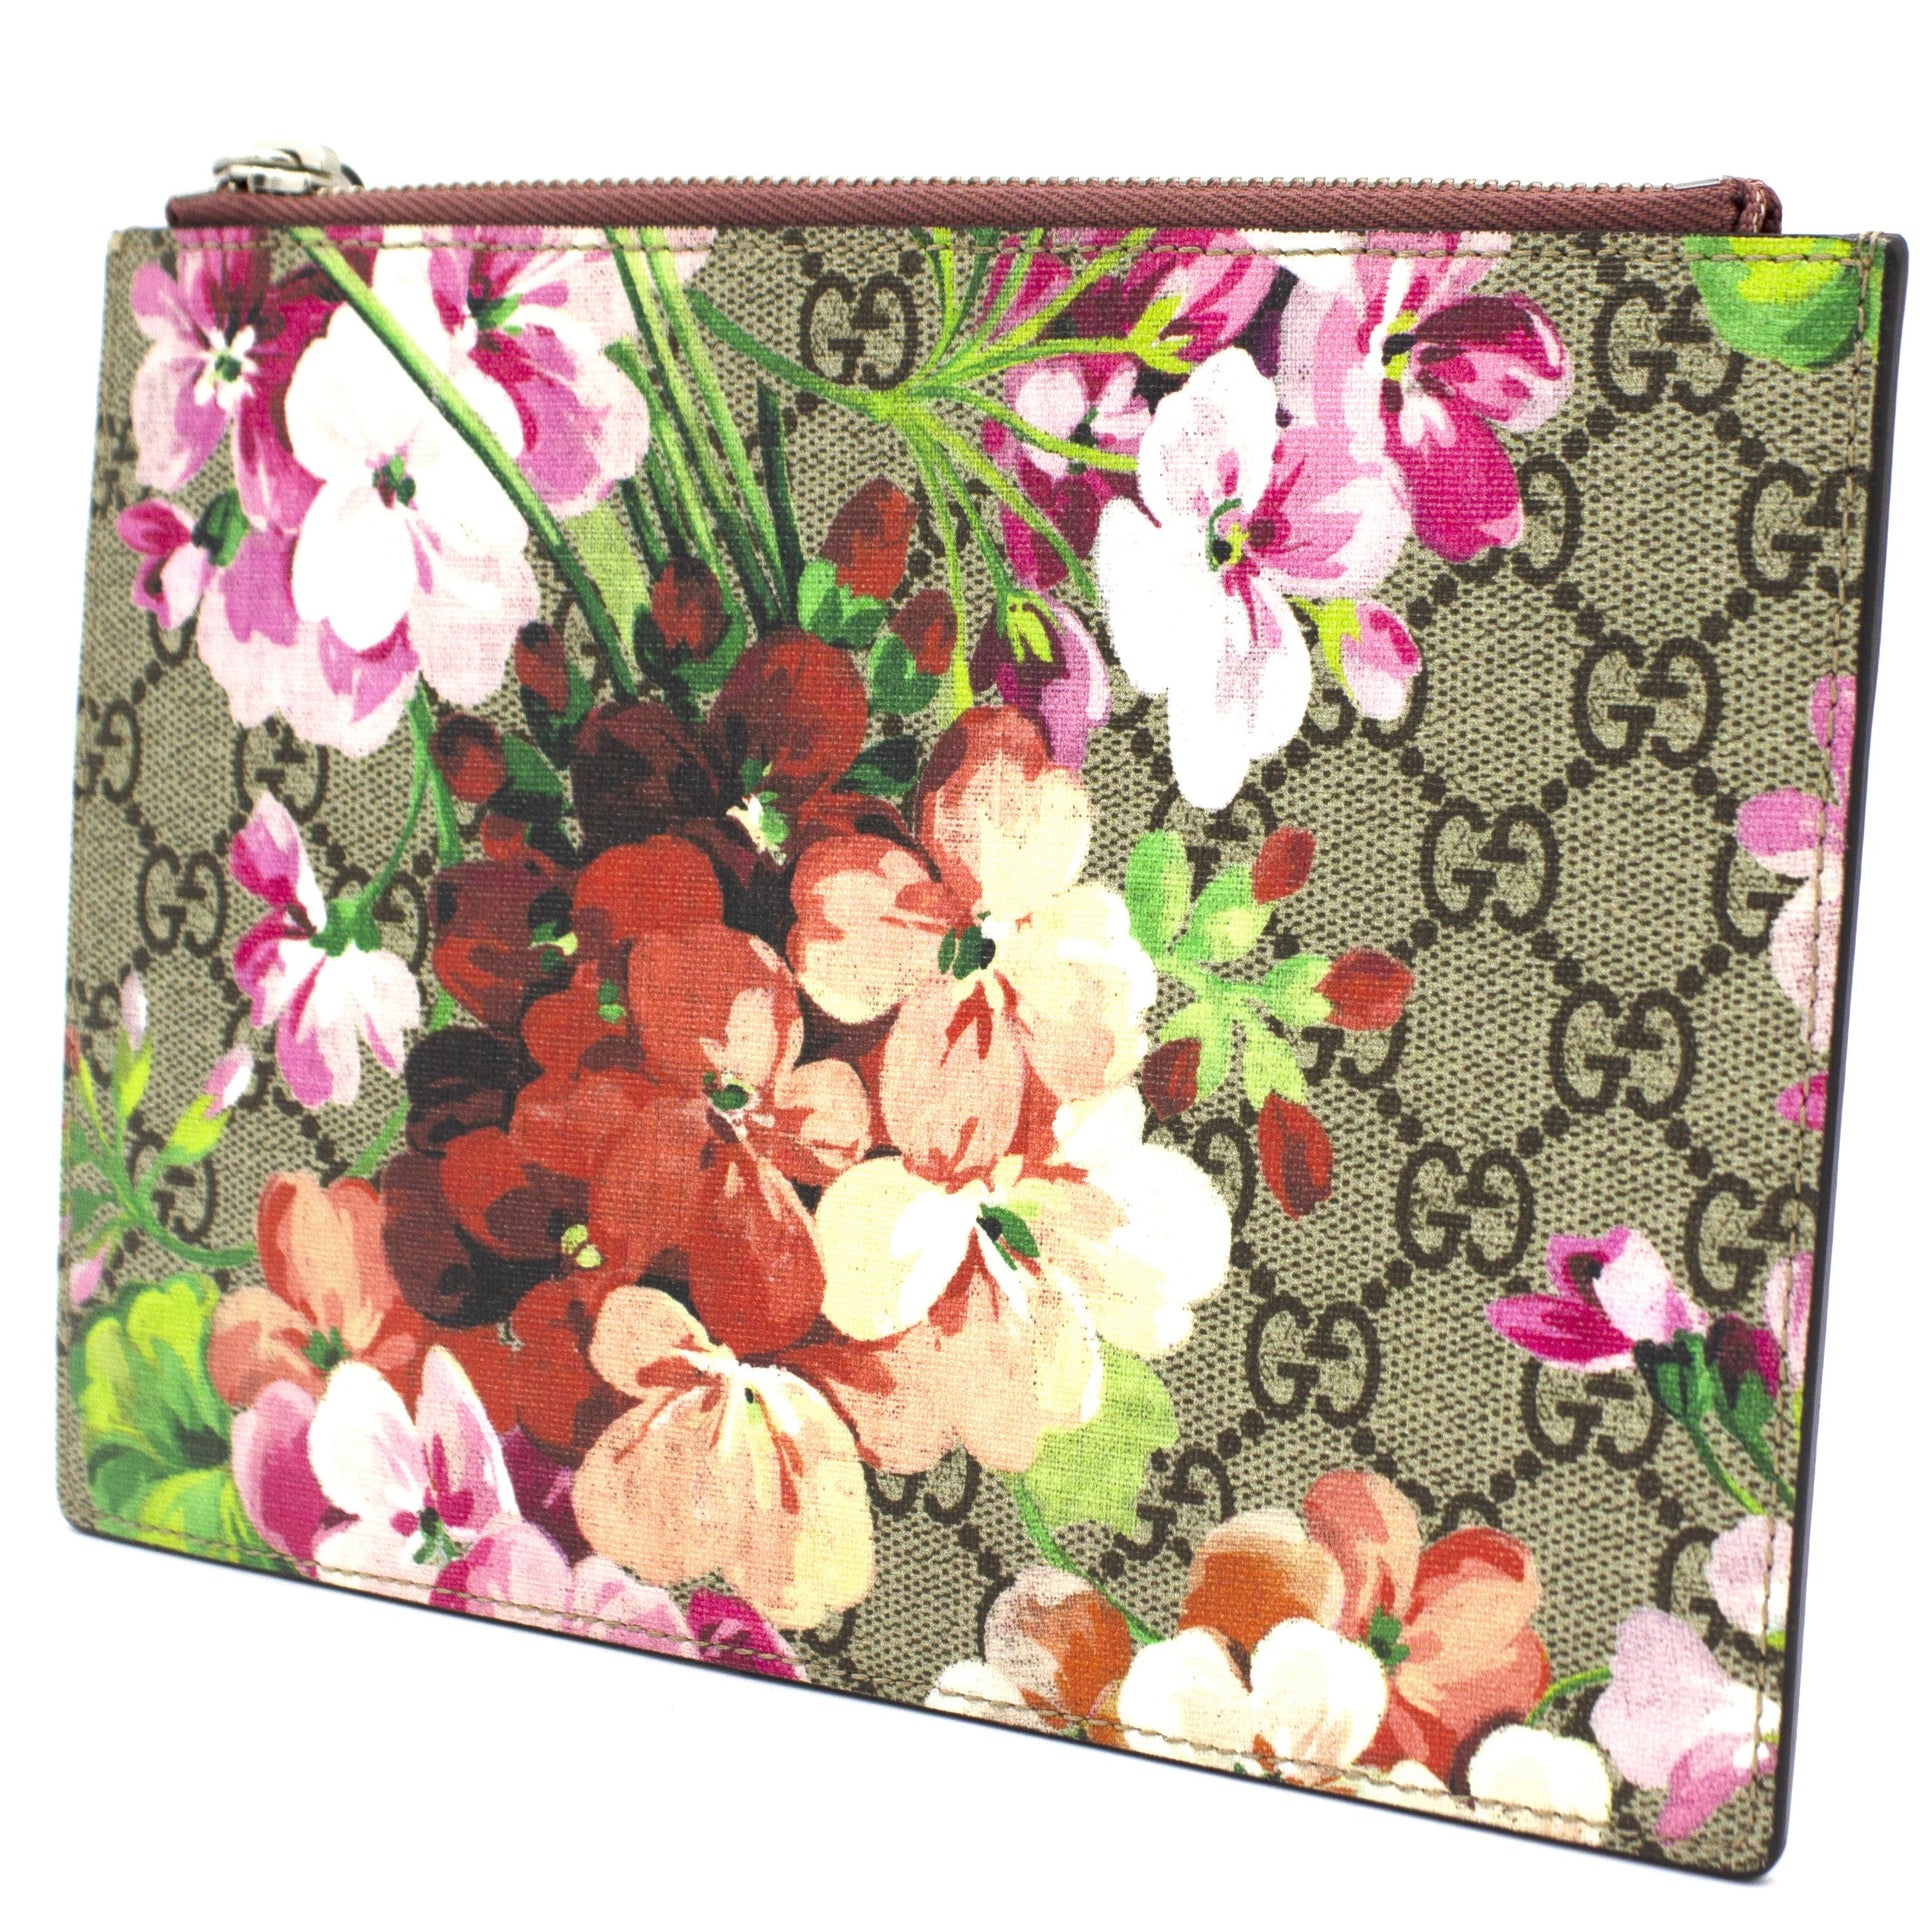 411691 GG Supreme Blooms Small Zip Pouch